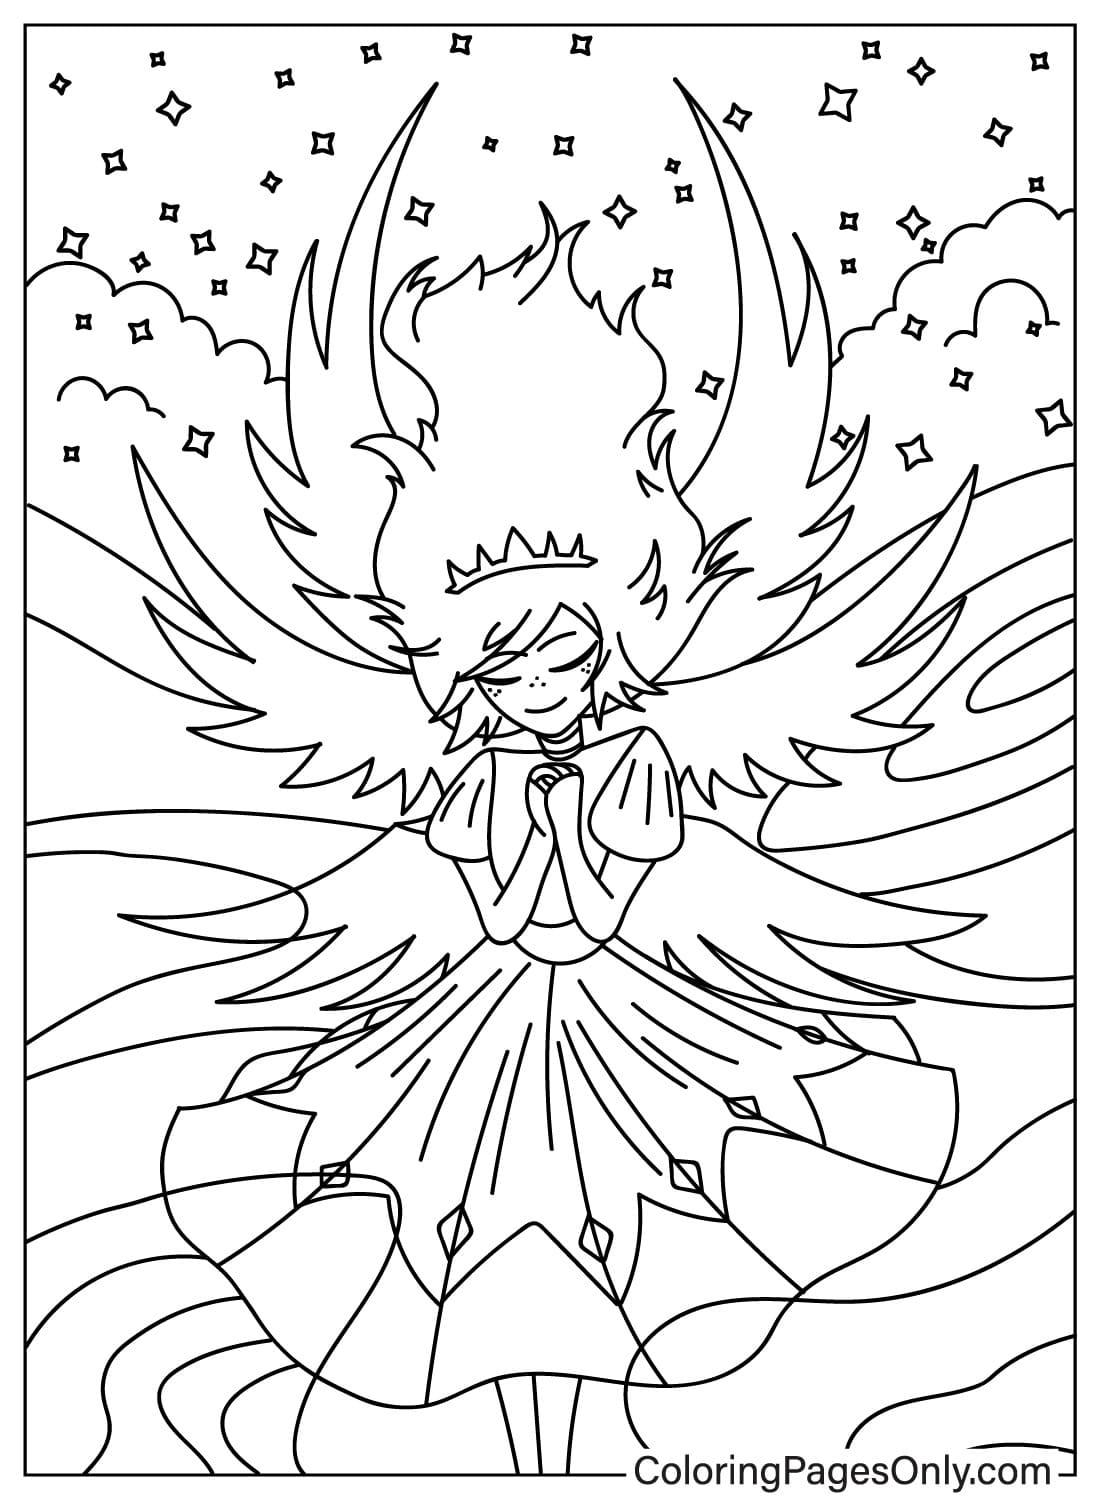 Emily Pray Coloring Page from Emily